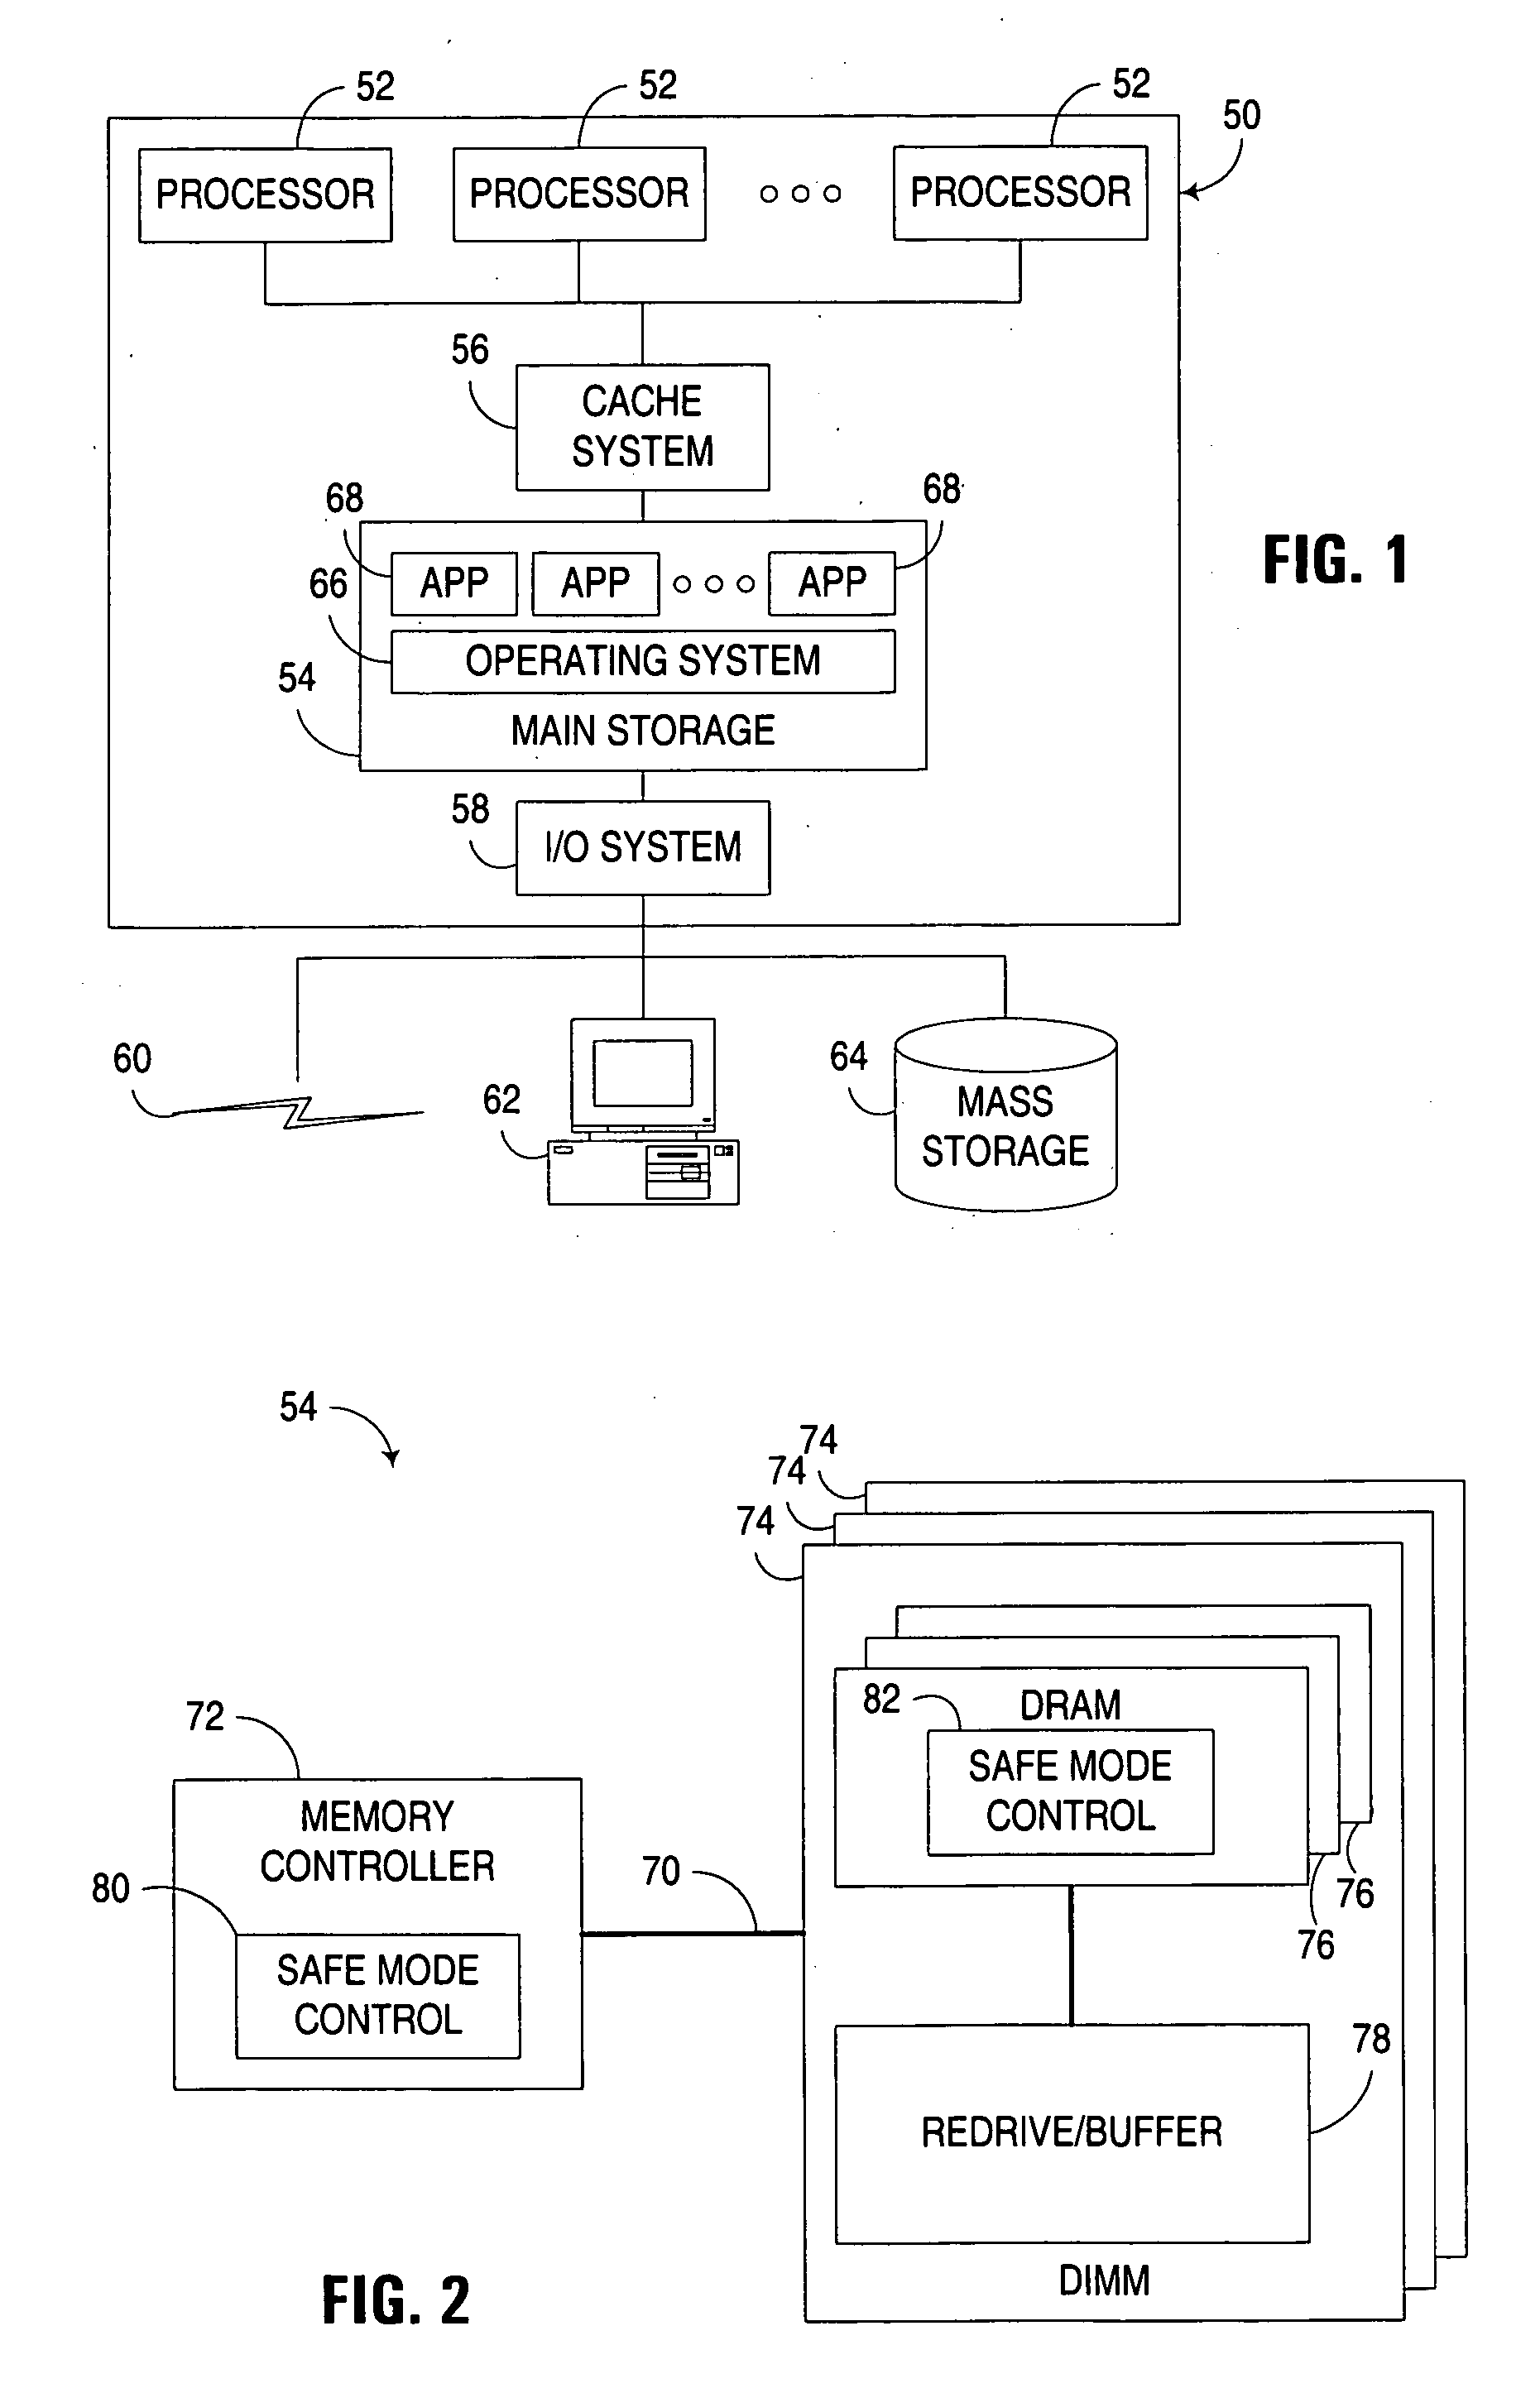 Dynamic reconfiguration of solid state memory device to replicate and time multiplex data over multiple data interfaces